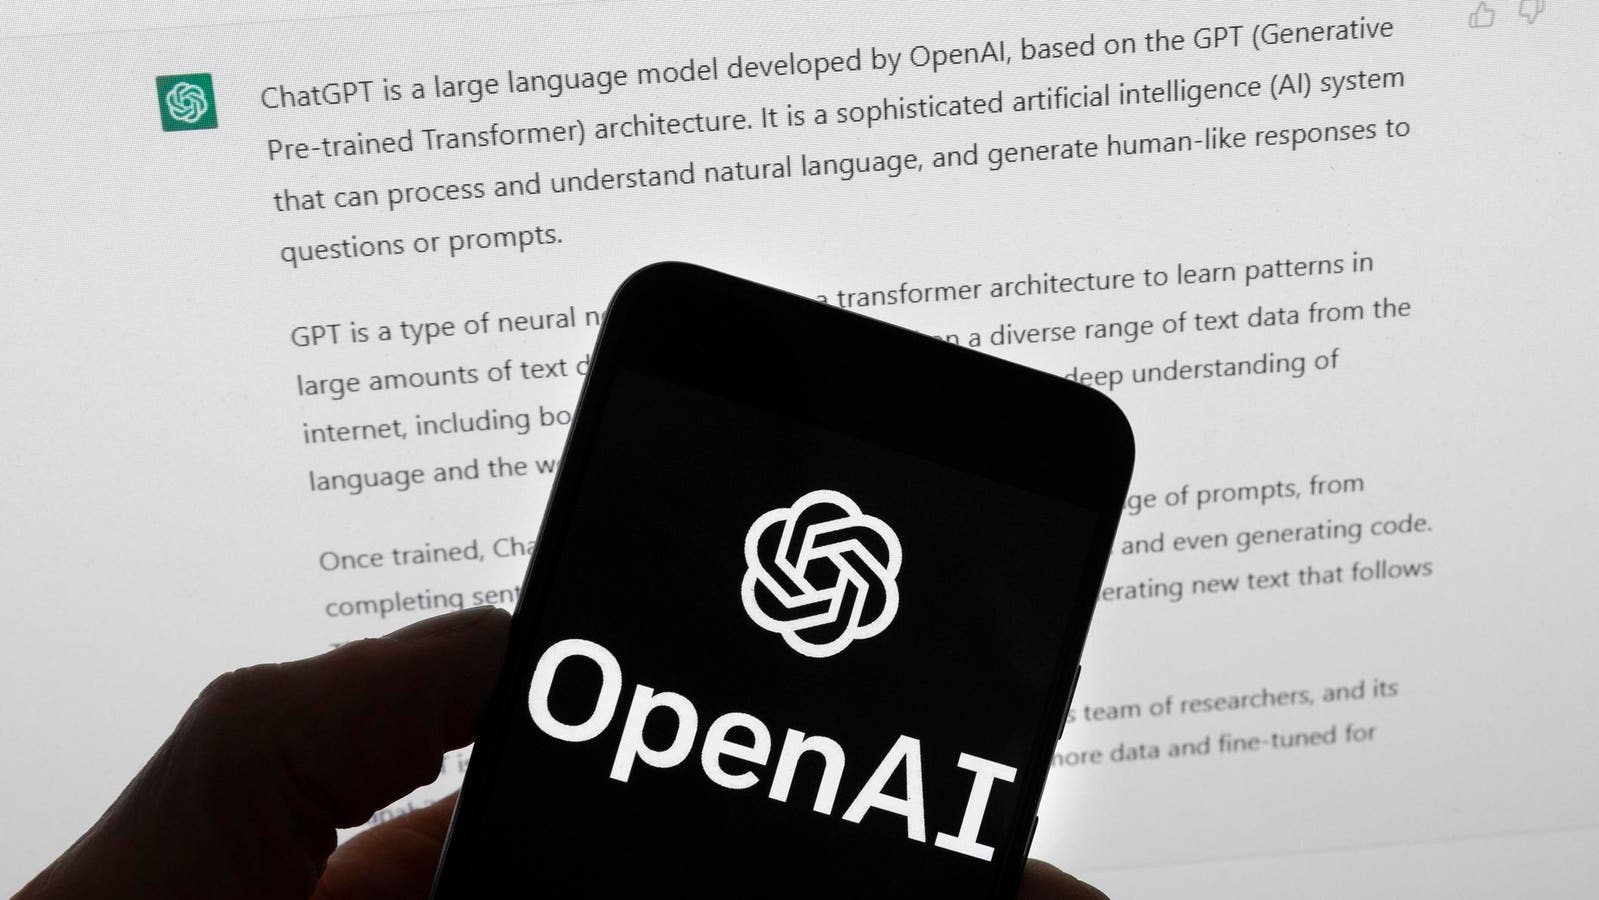 OpenAI Released A Preview Of Its AI Voice Generator—But It’s Not Available To The Public